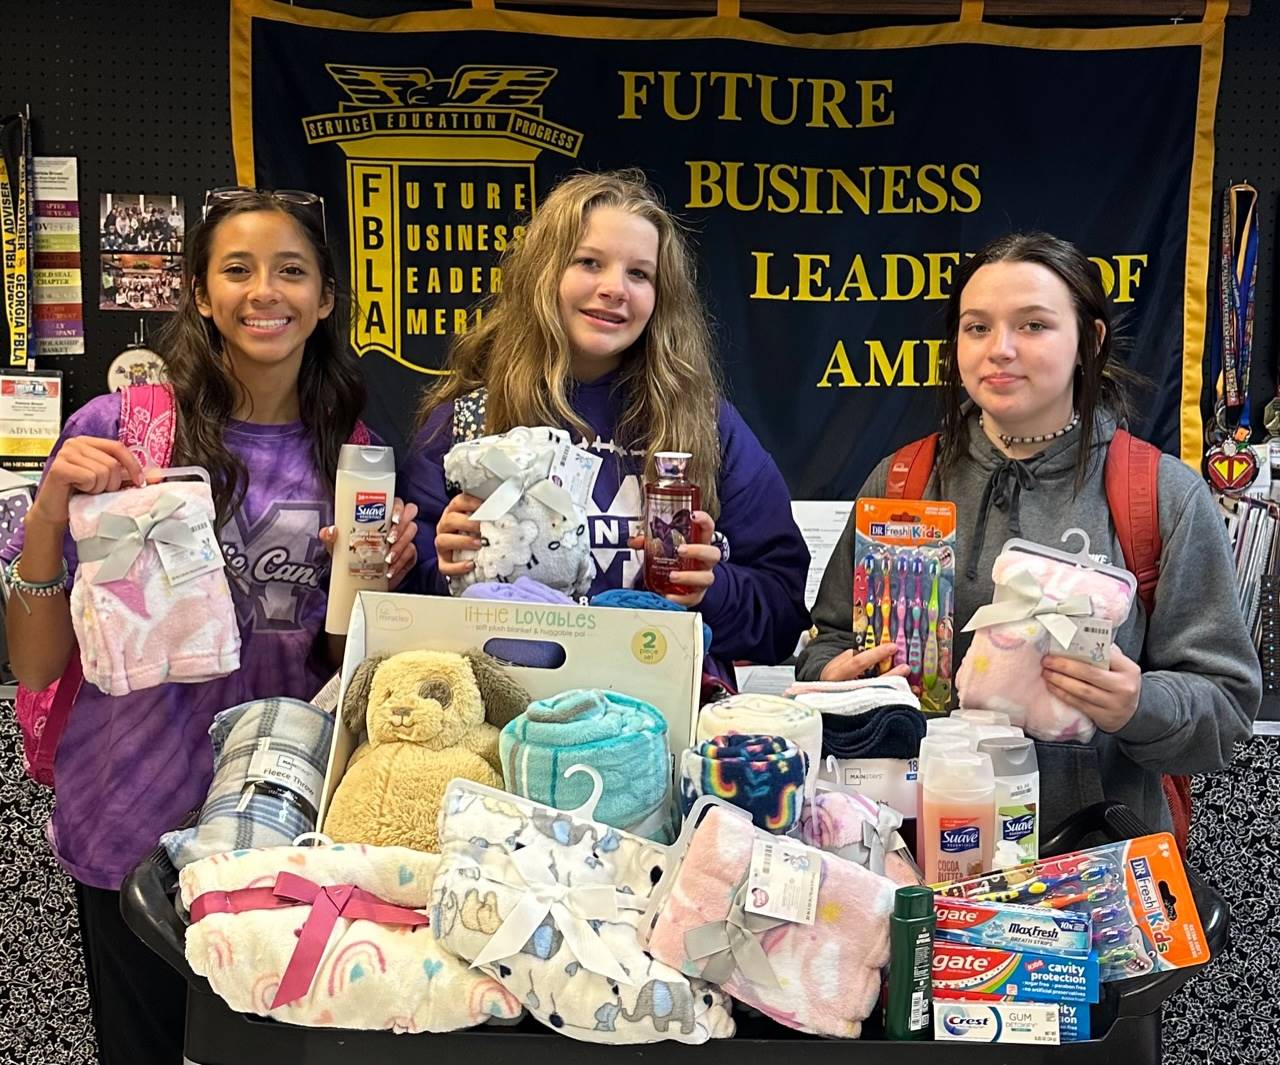 September - baby blankets & hygiene items for Project ReNeWal (pictured Chloe Ransom, Abigail Nix, C